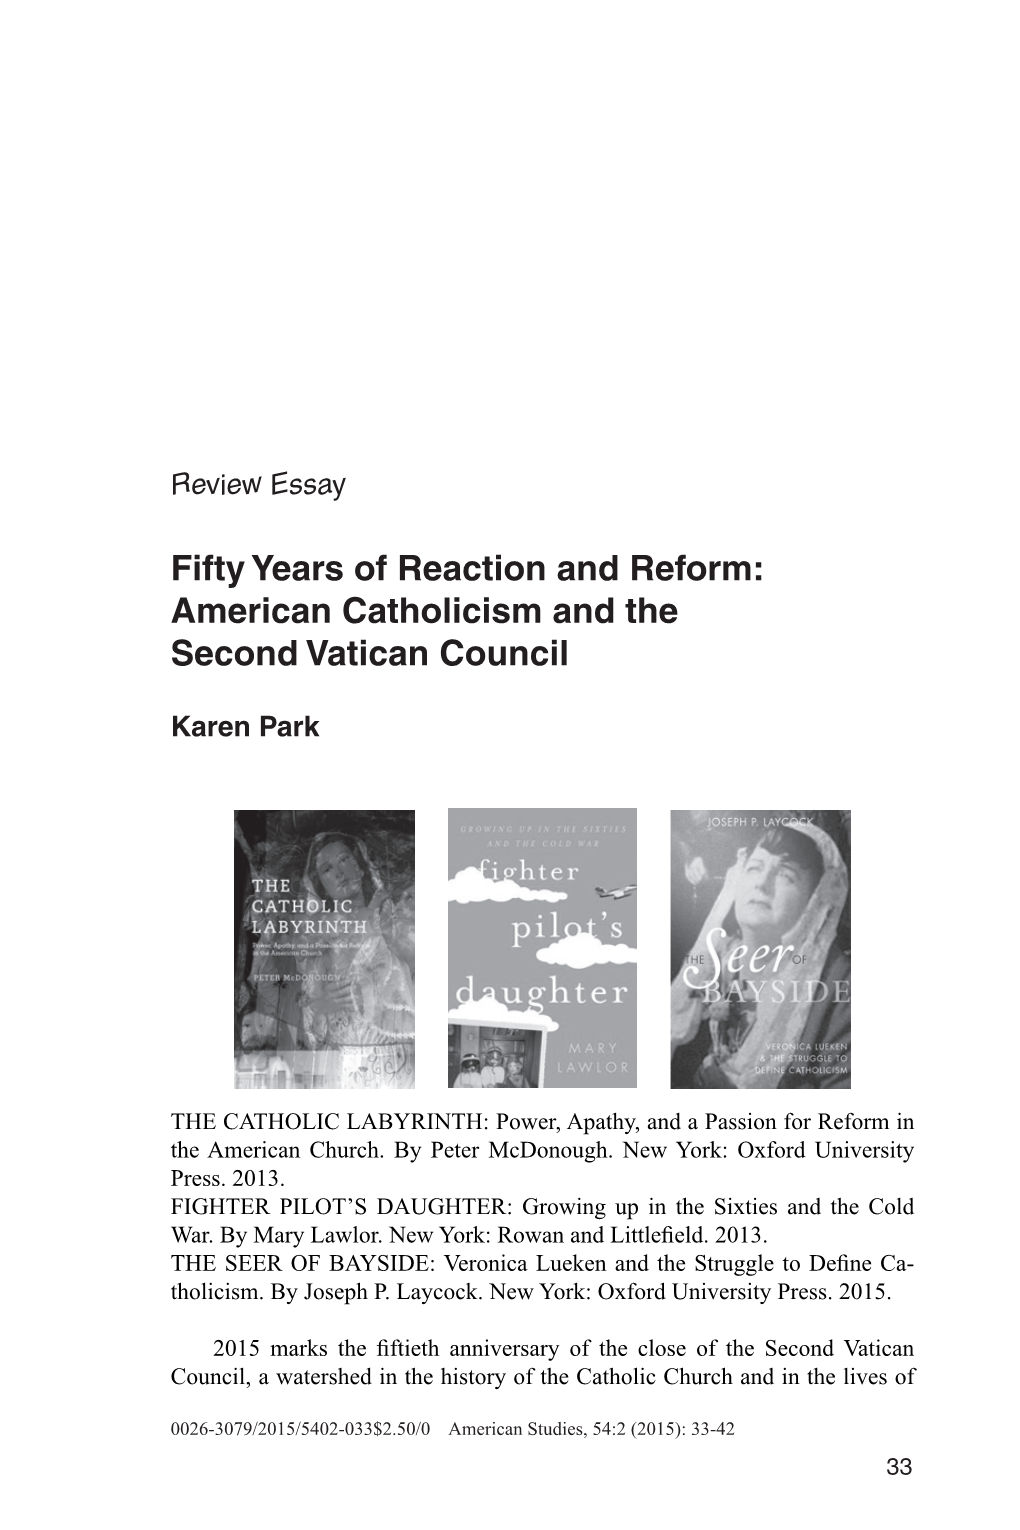 American Catholicism and the Second Vatican Council